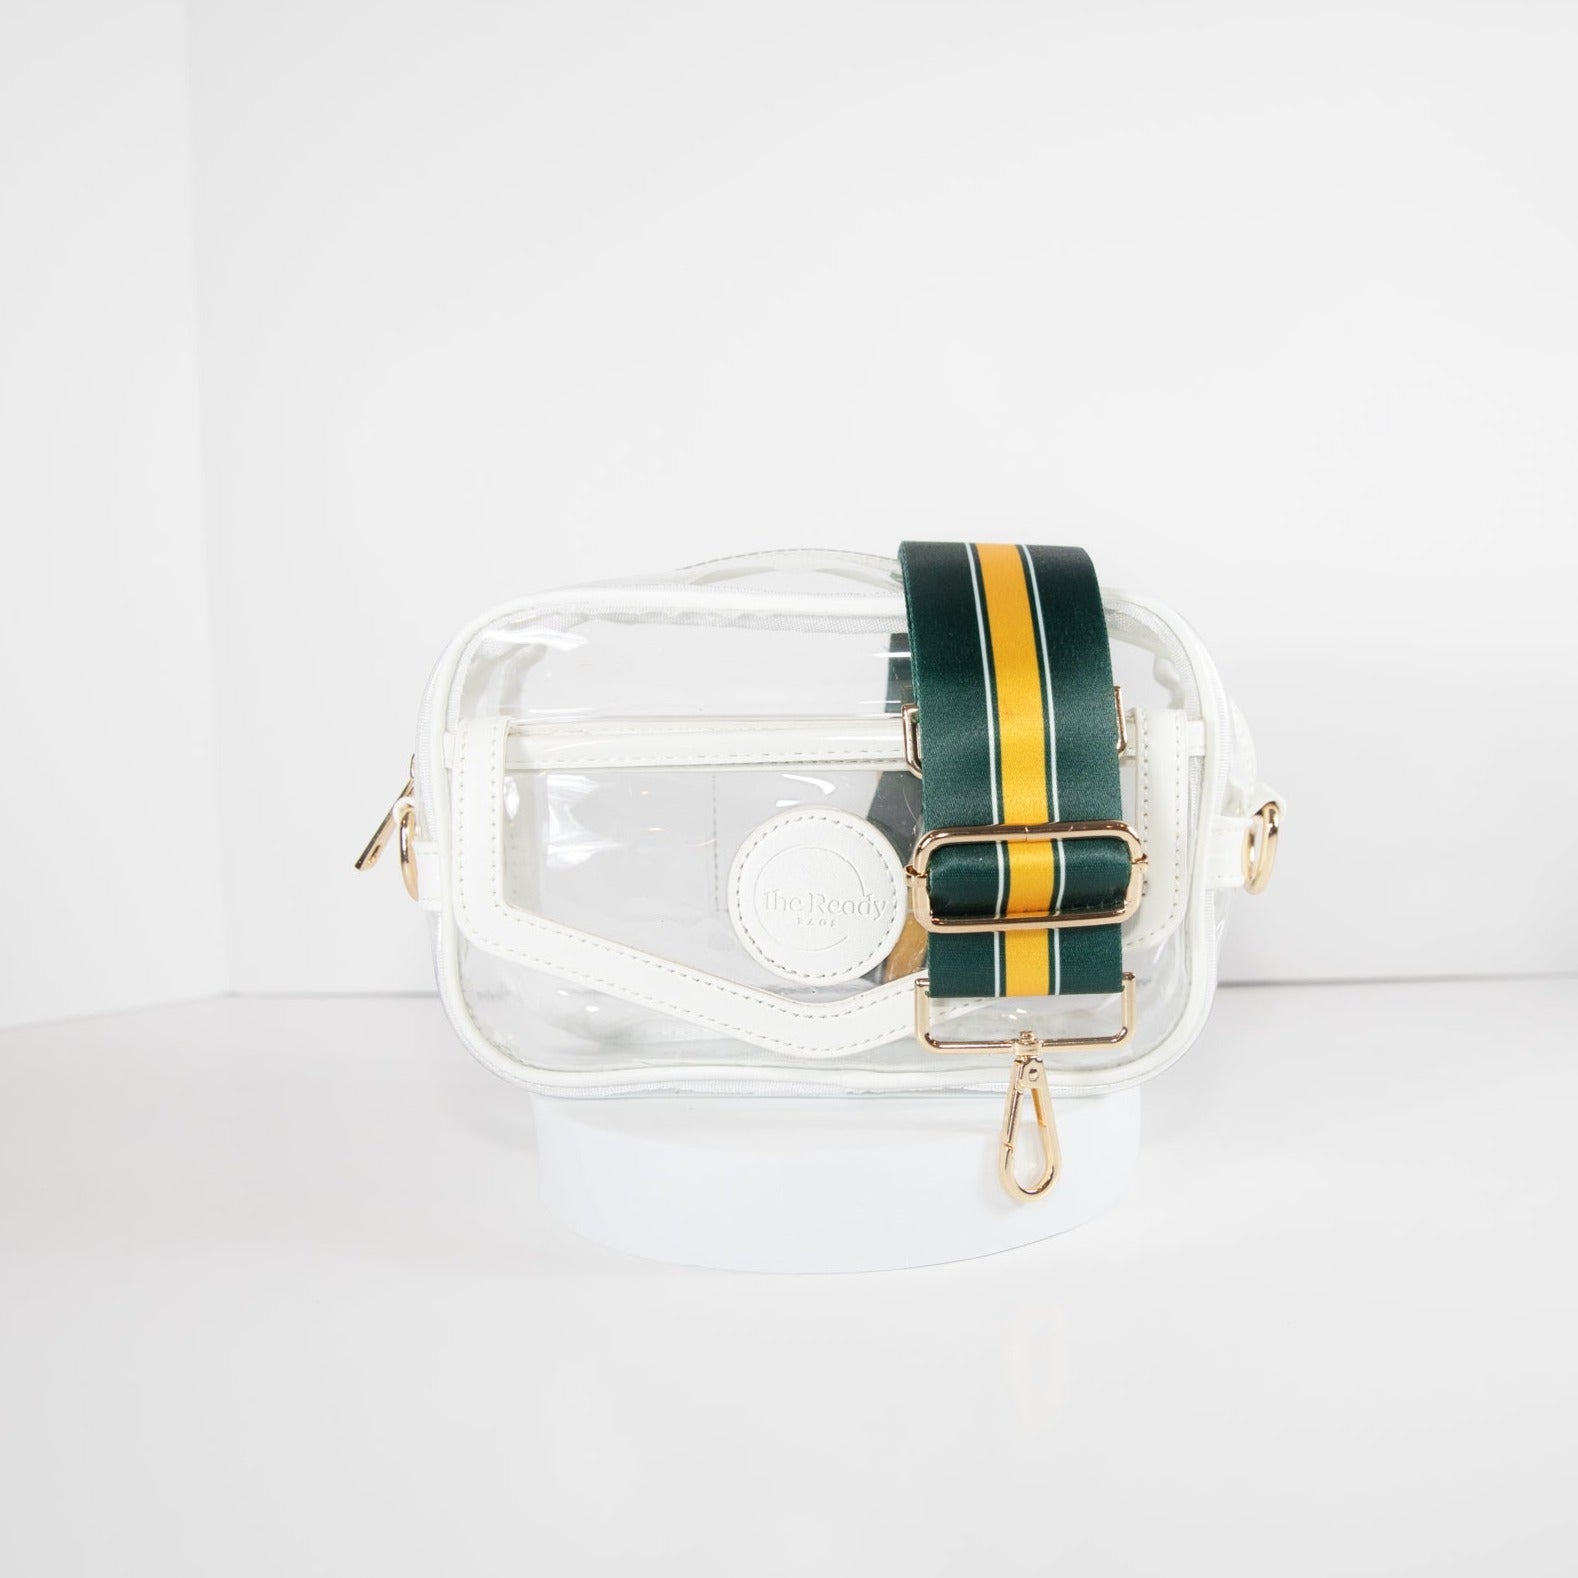 Clear Stadium Bag in white leather trim, front facing, with a strap in the team colors of the Green Bay Packers.